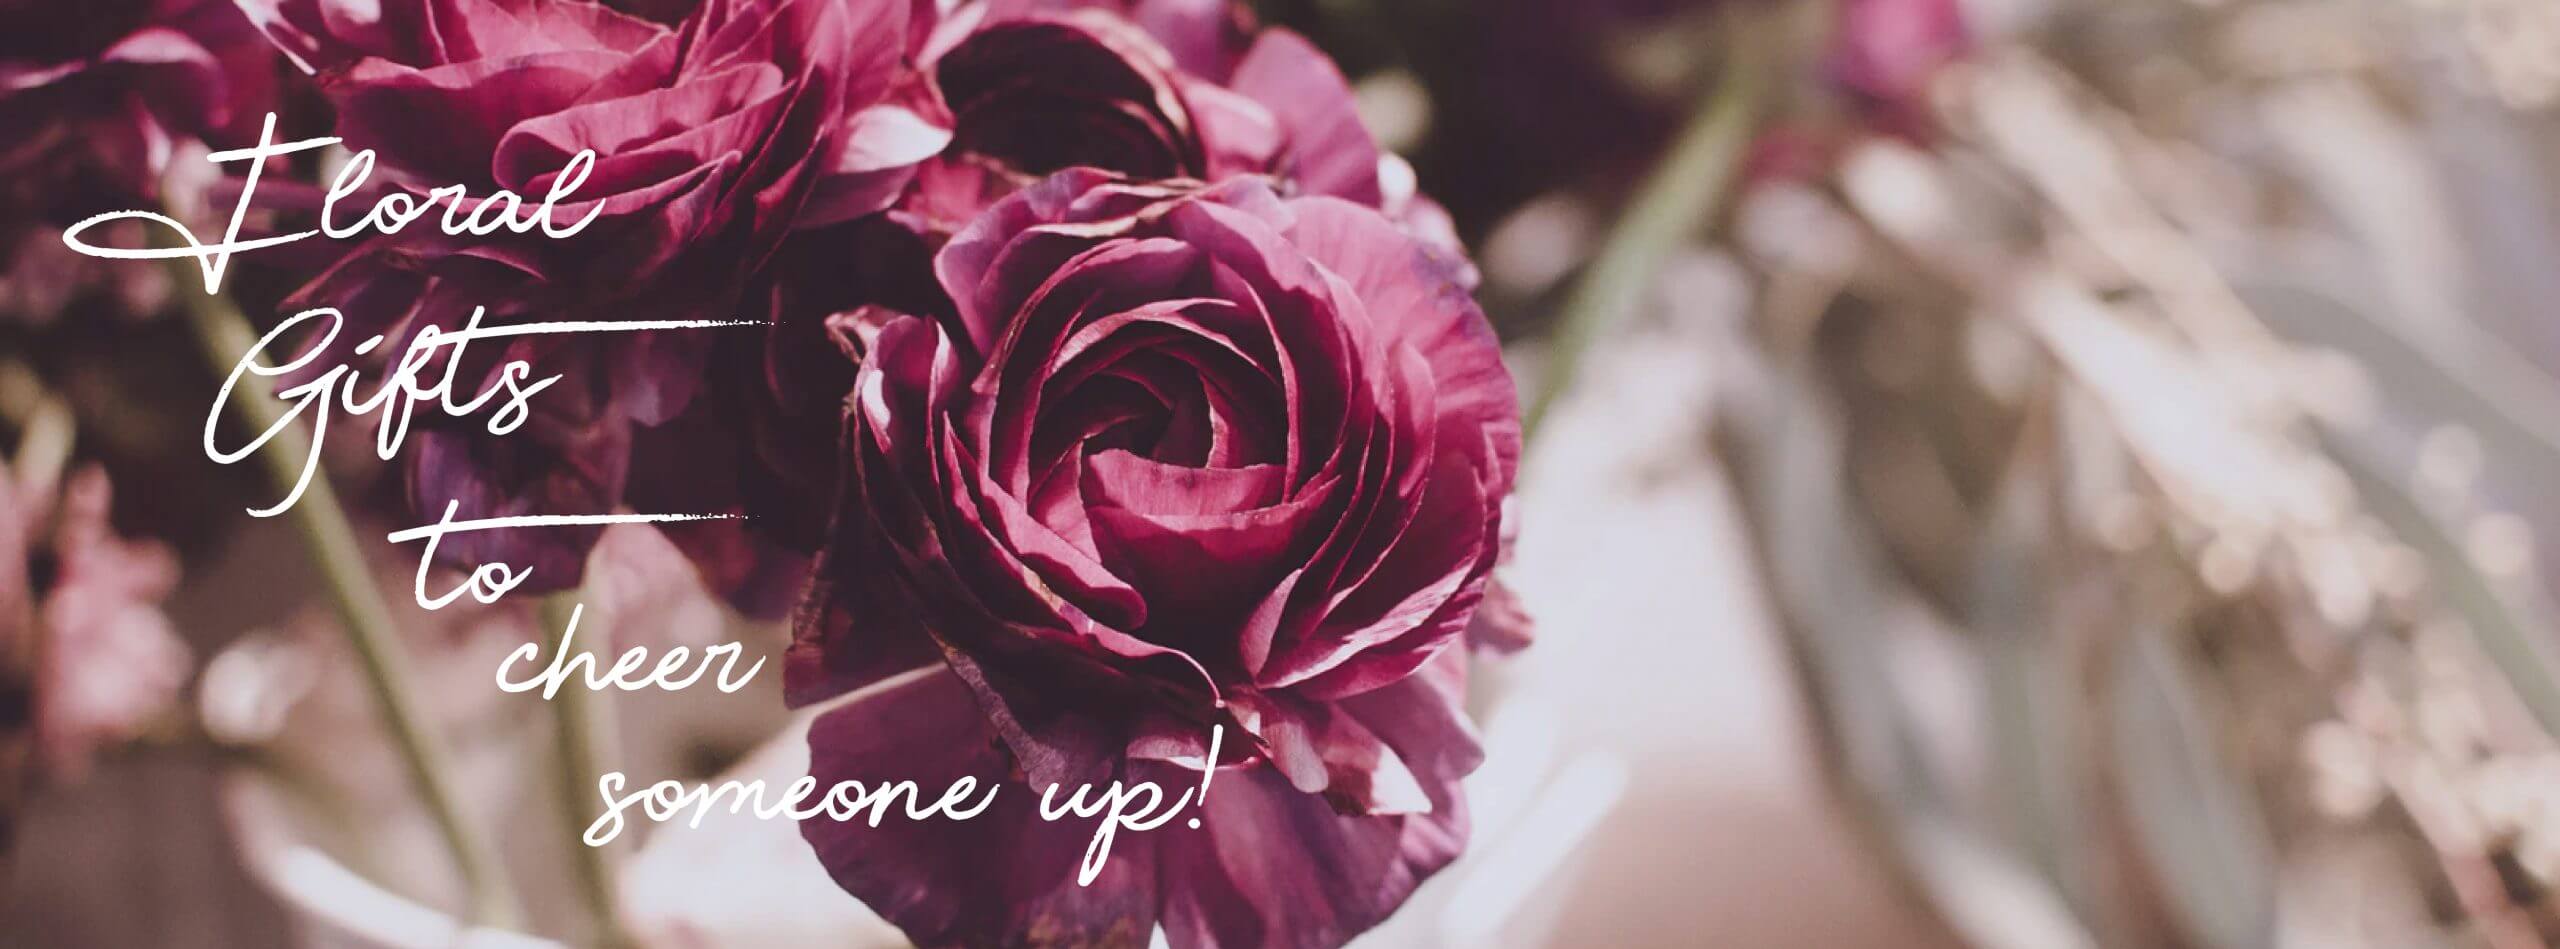 Flowers for the Heartbroken: What To Send To Cheer Someone Up